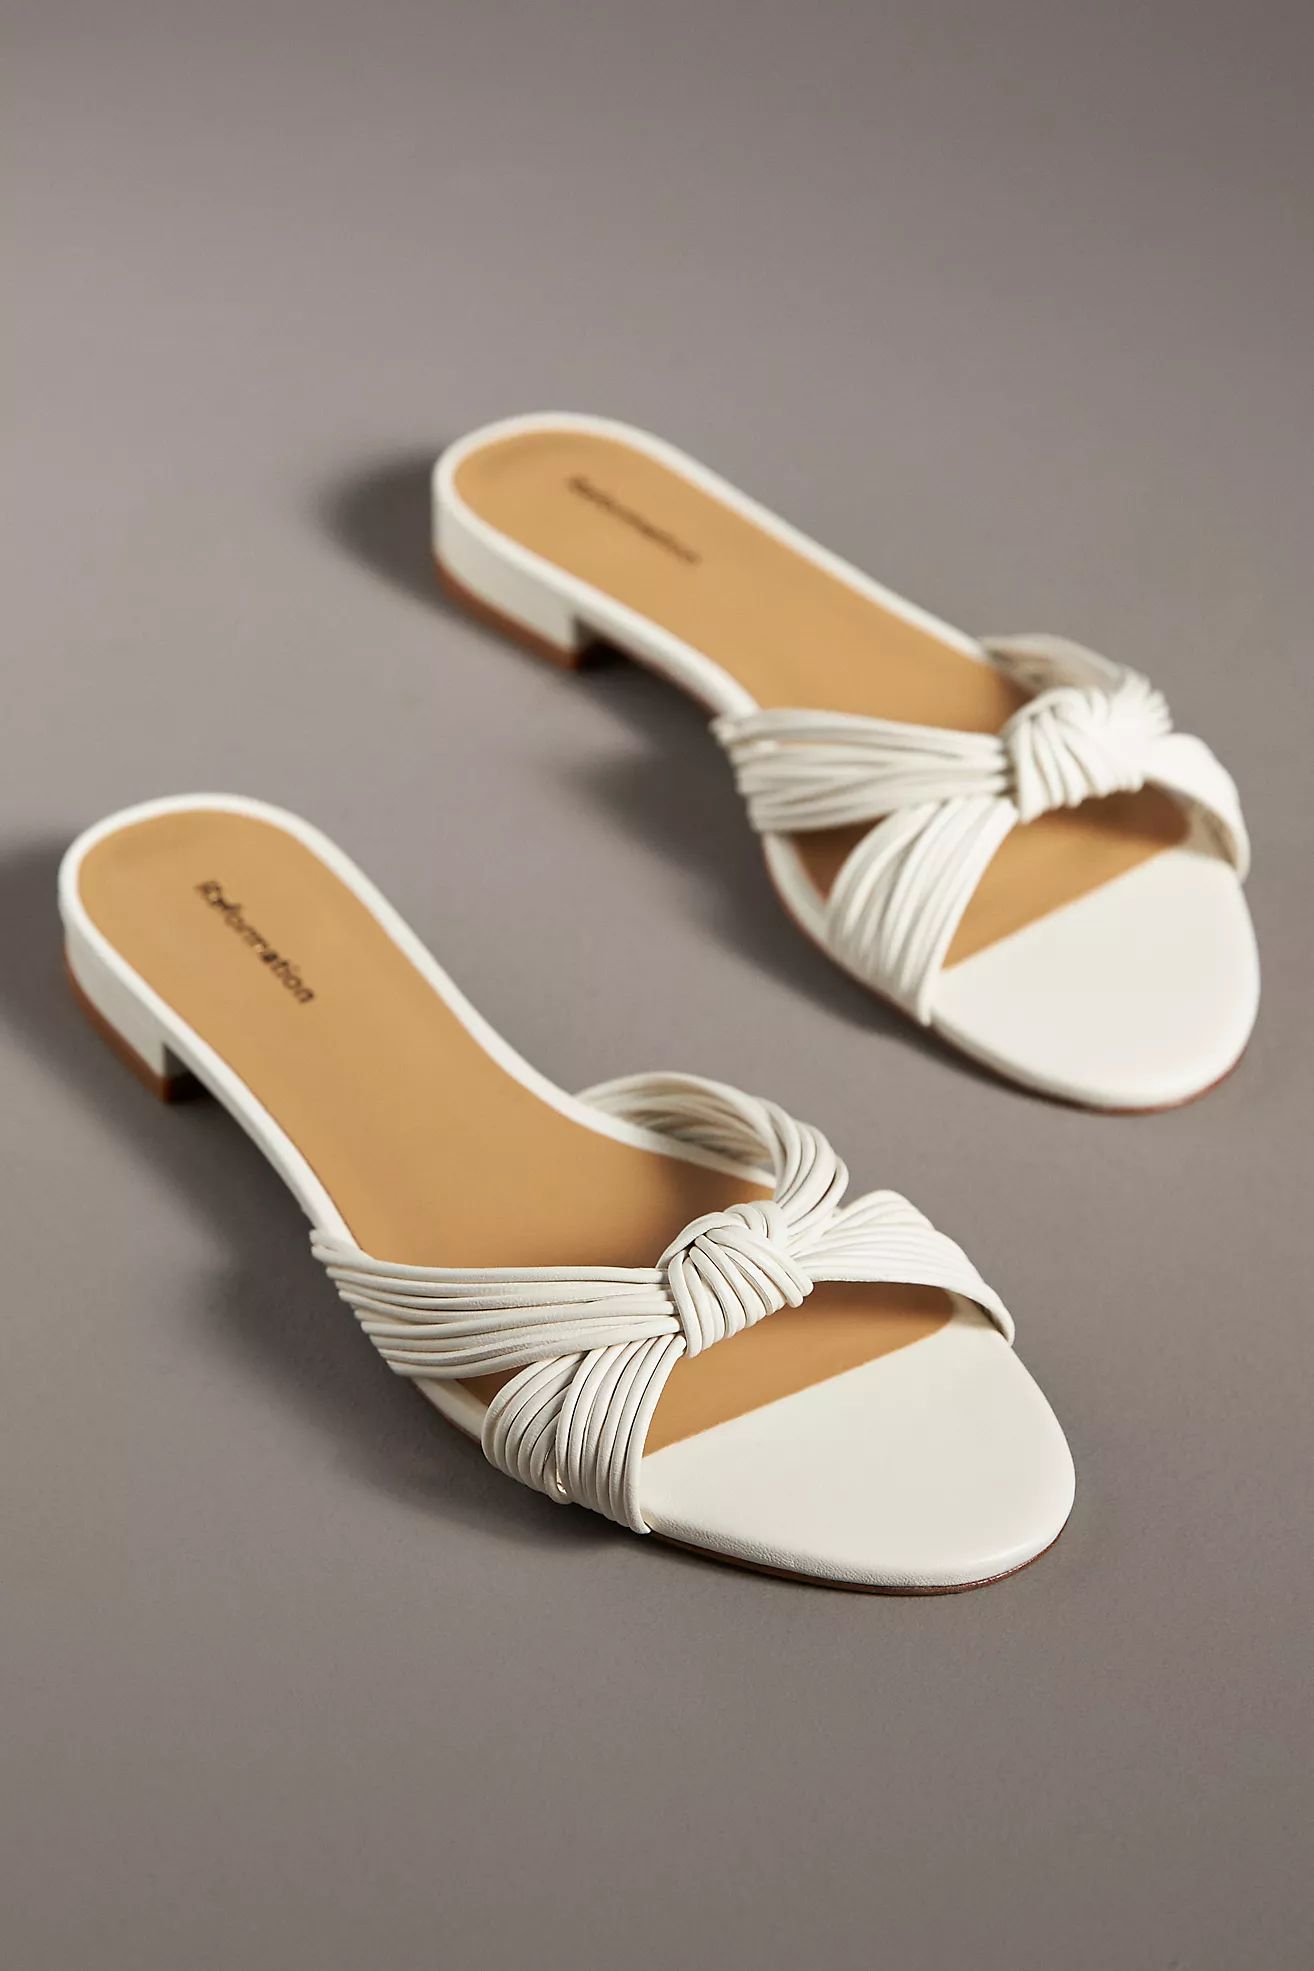 Reformation Peridot Mignon Knot Flat Sandals | Anthropologie (US)